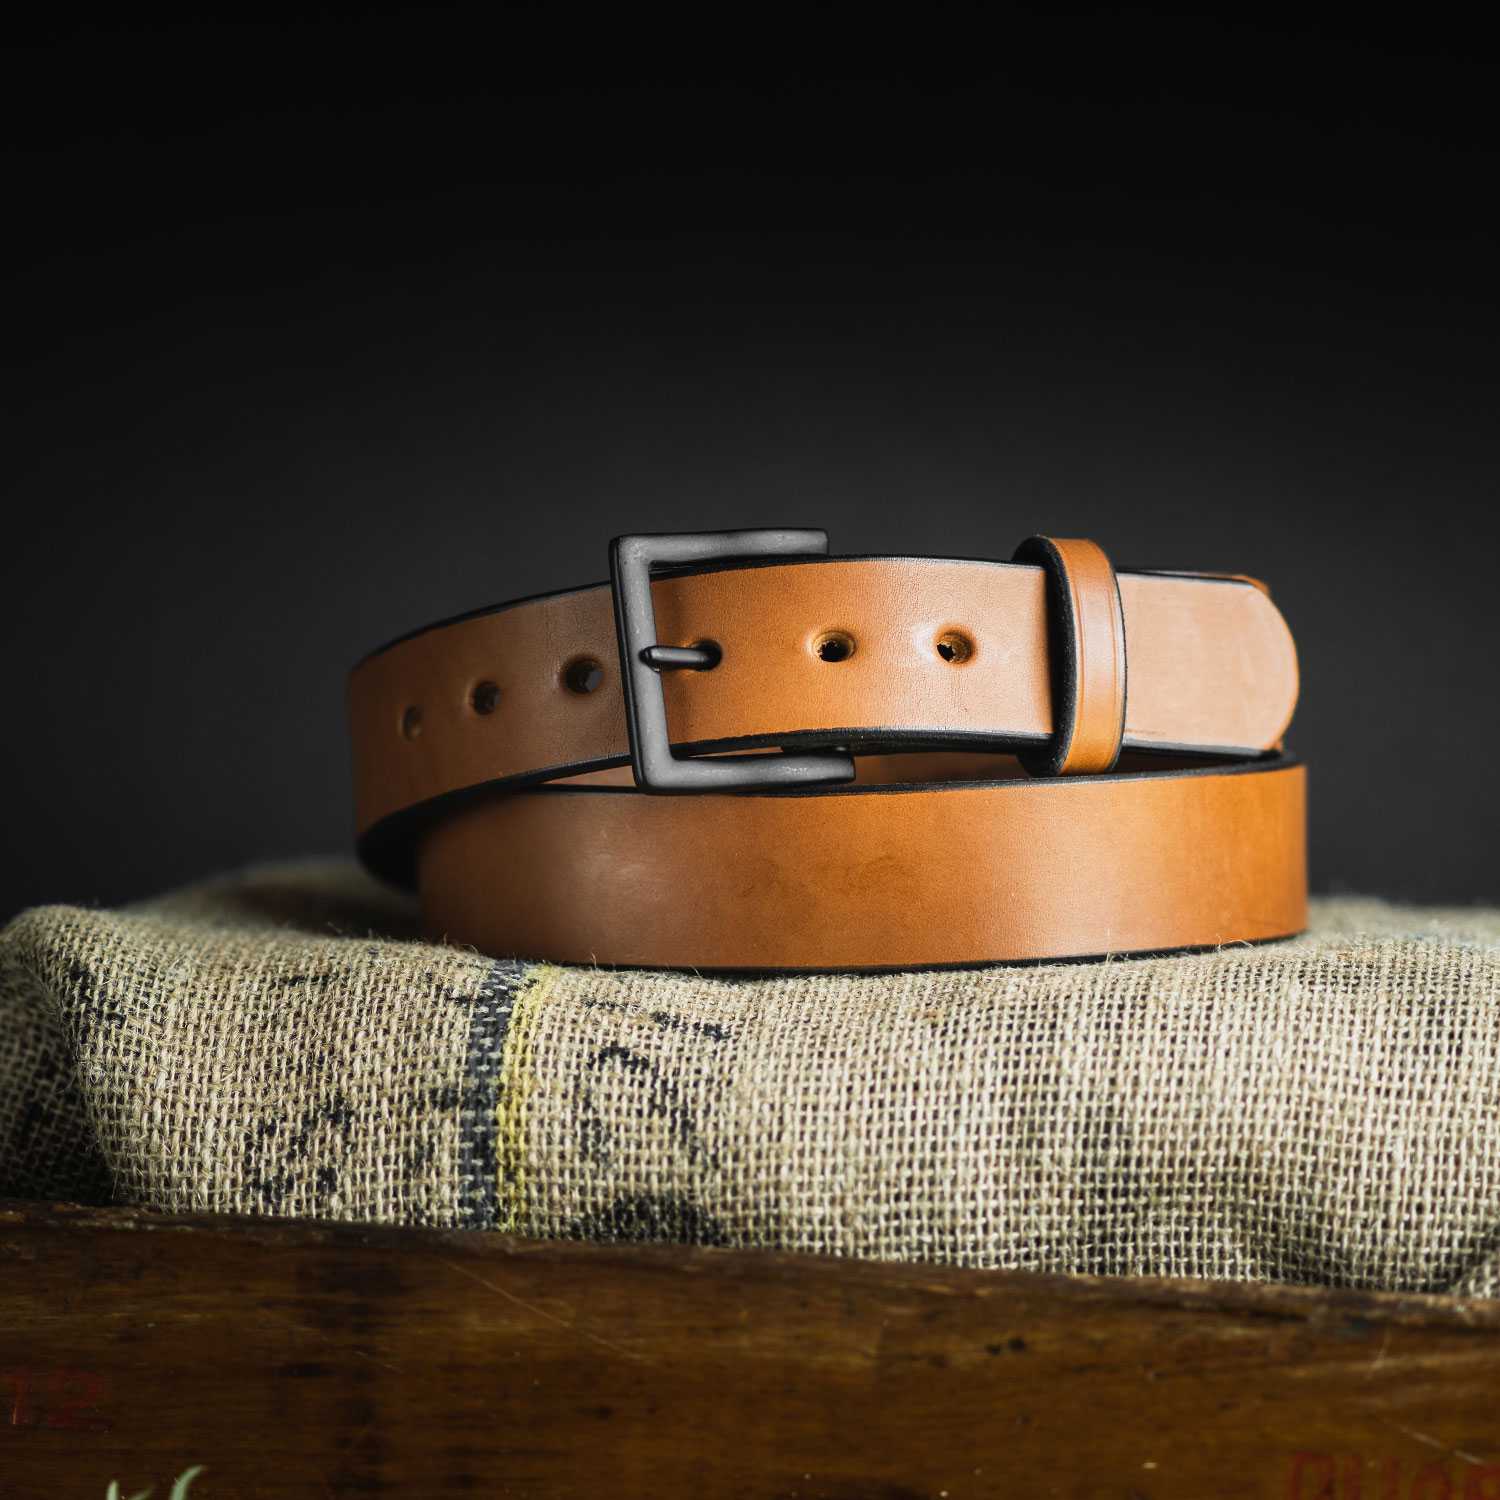 Full Grain Leather Belt Loops and Keepers - Many Sizes, Colours and Styles